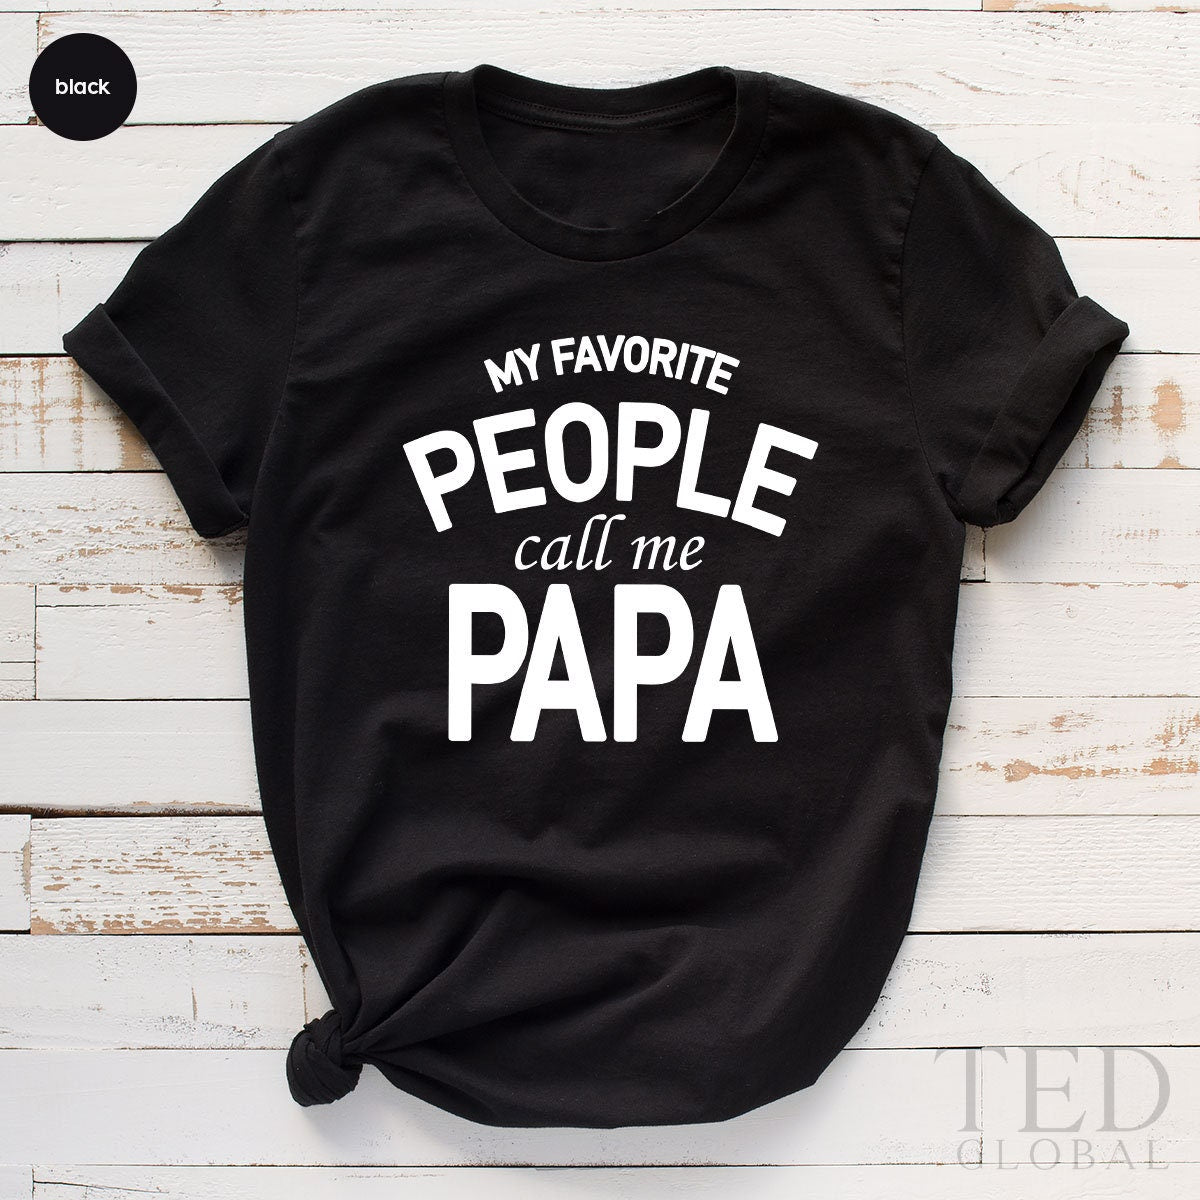 Fathers Day Tee, Papa Shirt, Gift For Dad, Grandpa Shirt, Daddy T Shirt, Best Dad Shirt, My Favorite People Call Me Papa, Fathers Day Gifts - Fastdeliverytees.com